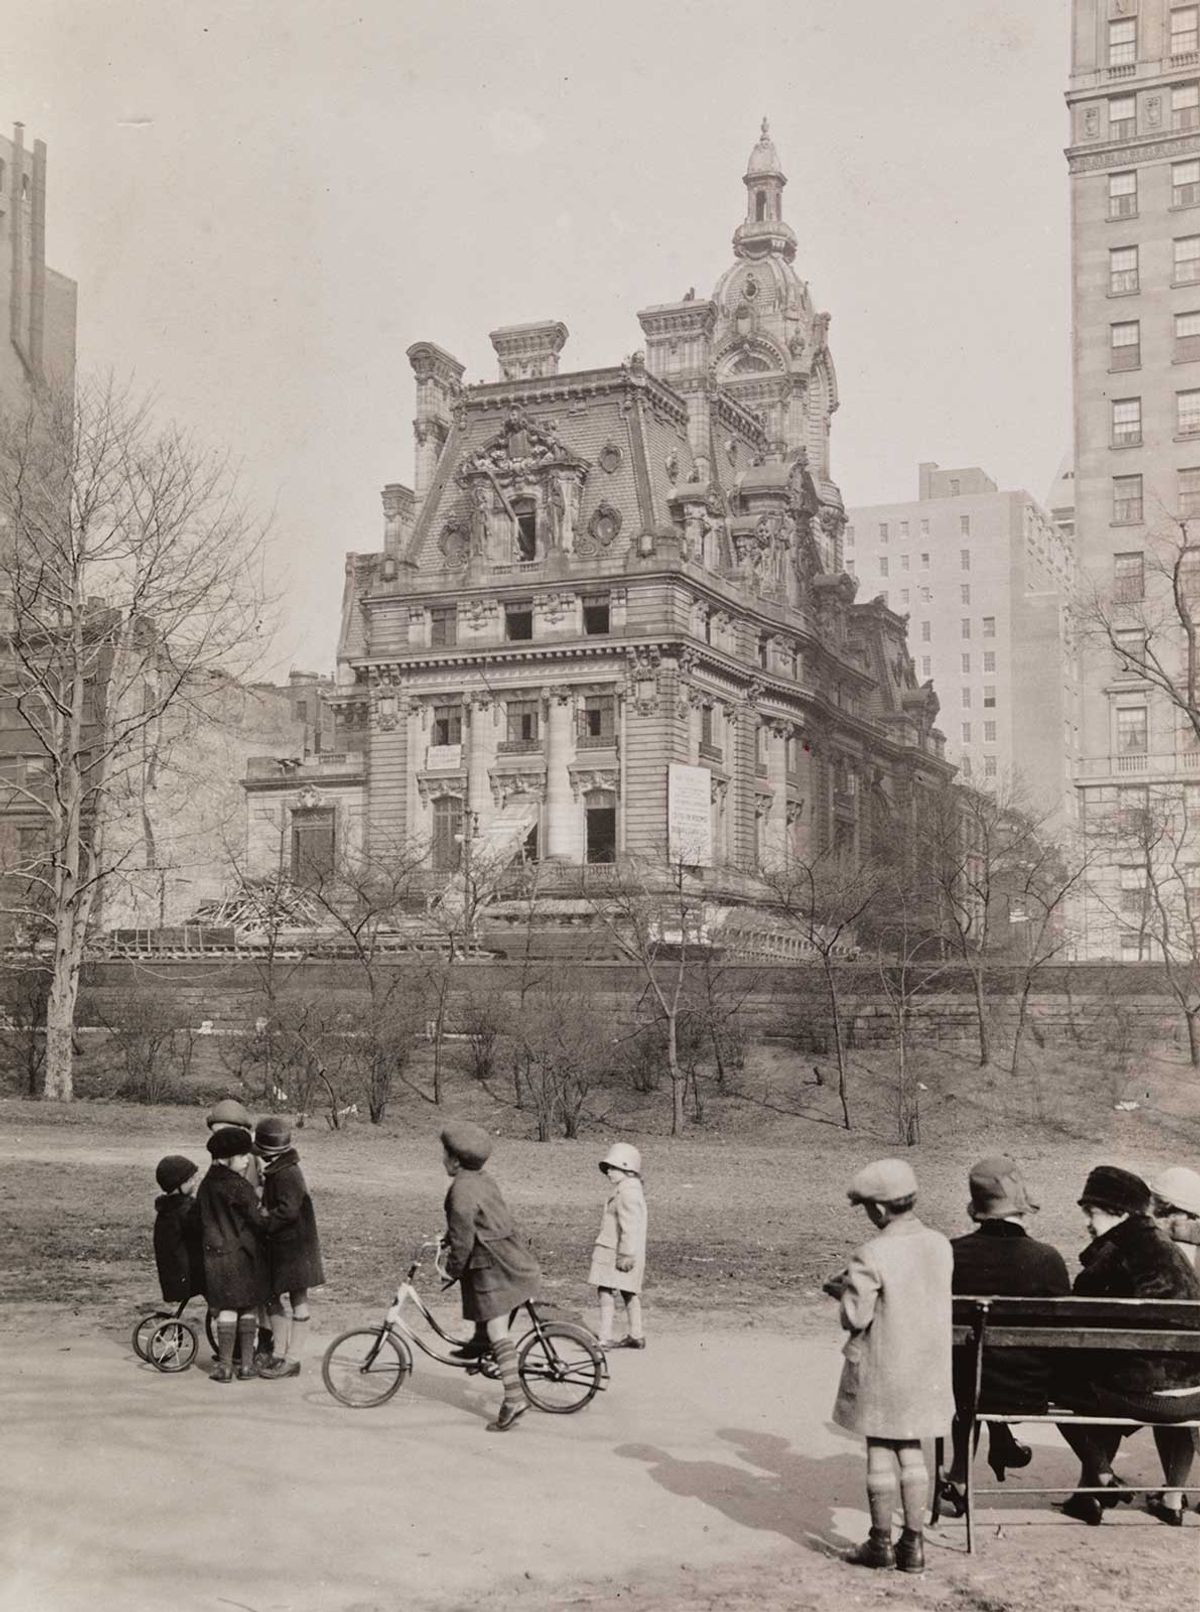 “Clark’s Folly”: William A. Clark’s French-style pile, which was demolished in 1927 and replaced by a luxury apartment building (960 Fifth Avenue)


